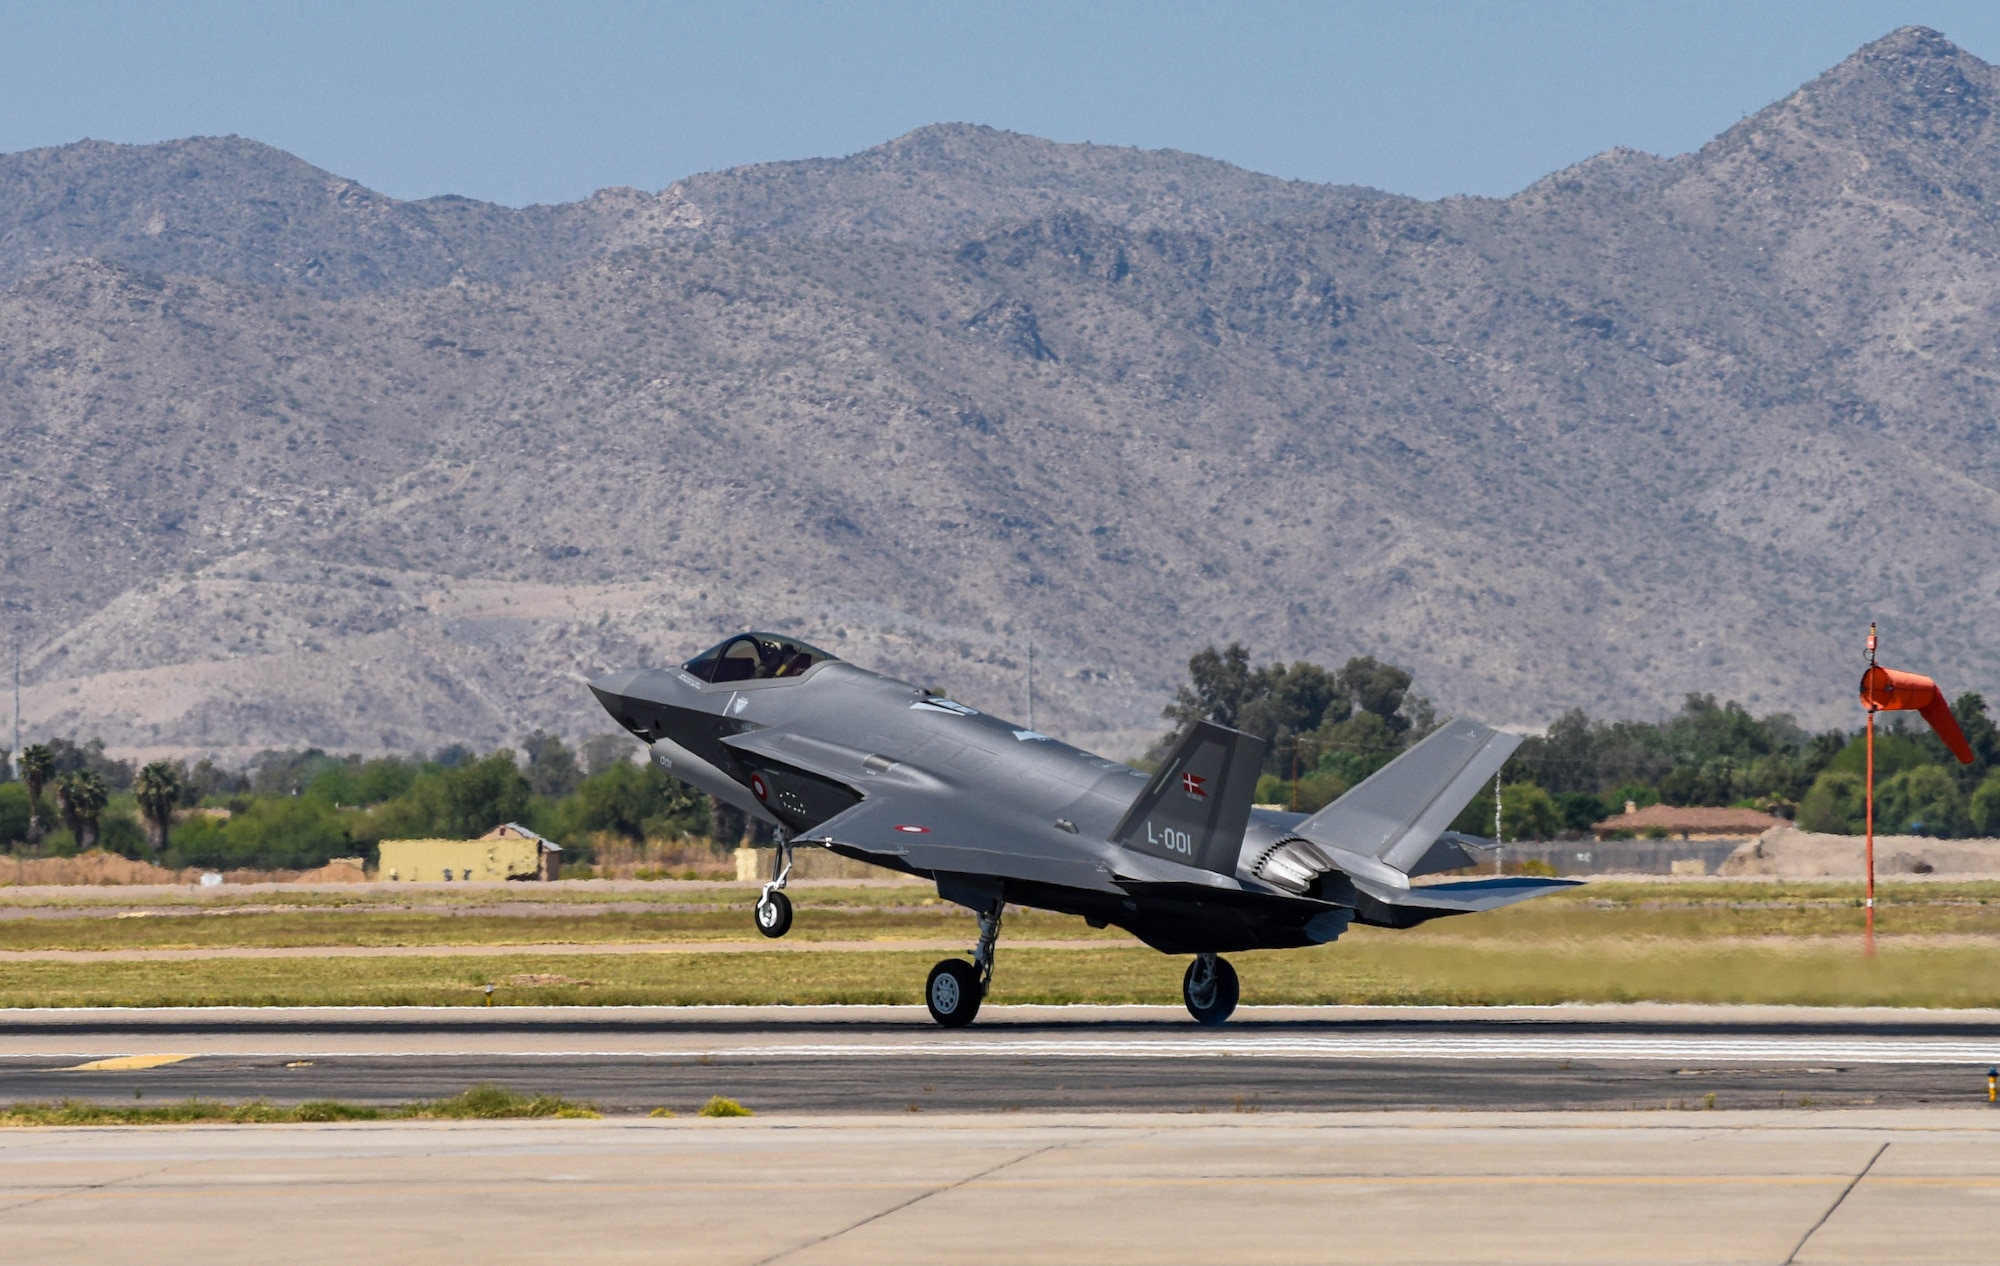 A Royal Danish Air Force F-35A Lightning II assigned to the 308th Fighter Squadron lands, April 13, 2021, at Luke Air Force Base, Arizona.